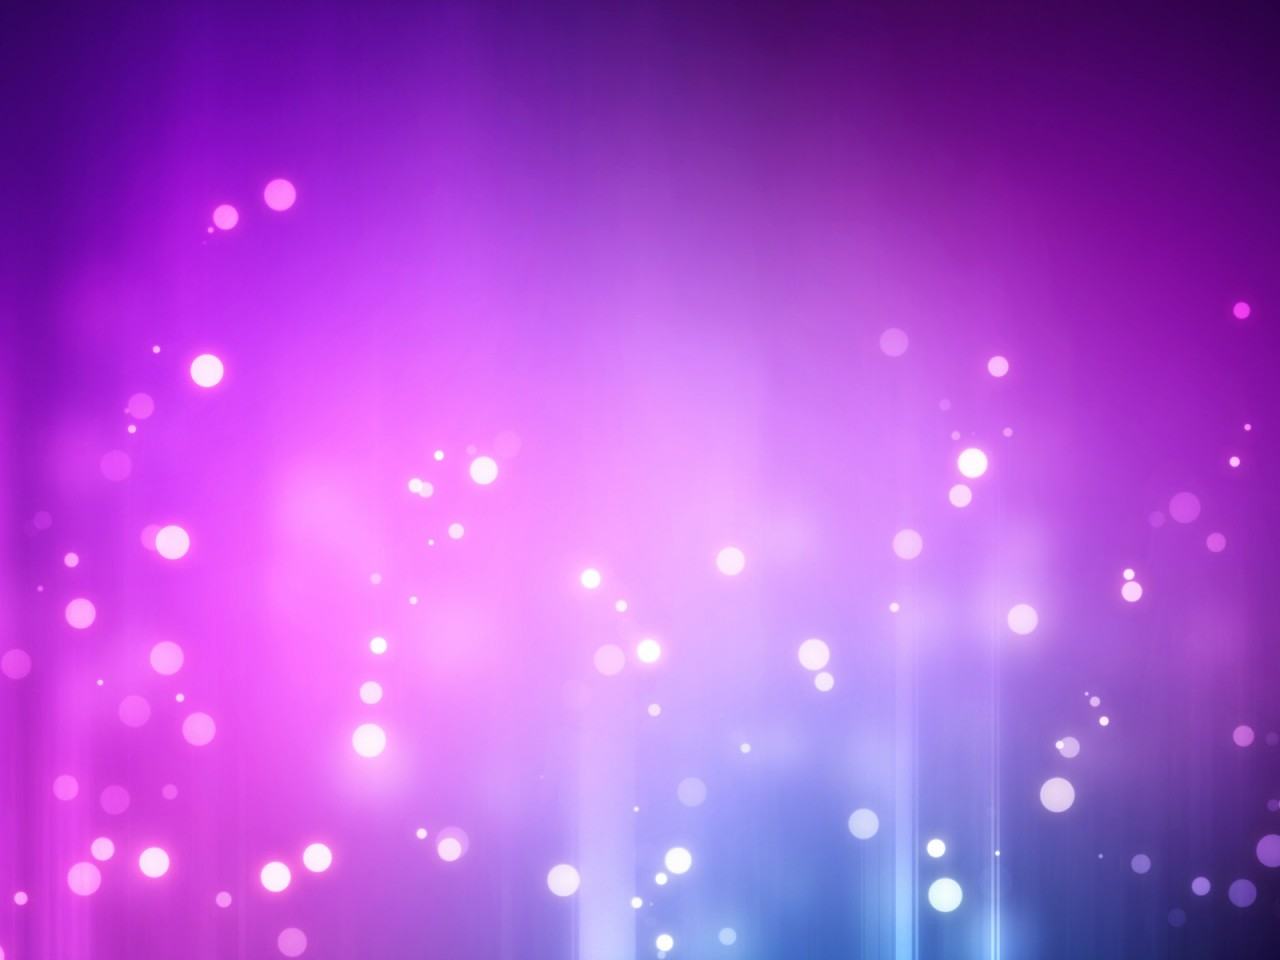 Wallpapers Waves Purple Stars Abstract 1280x960 | #45684 #waves